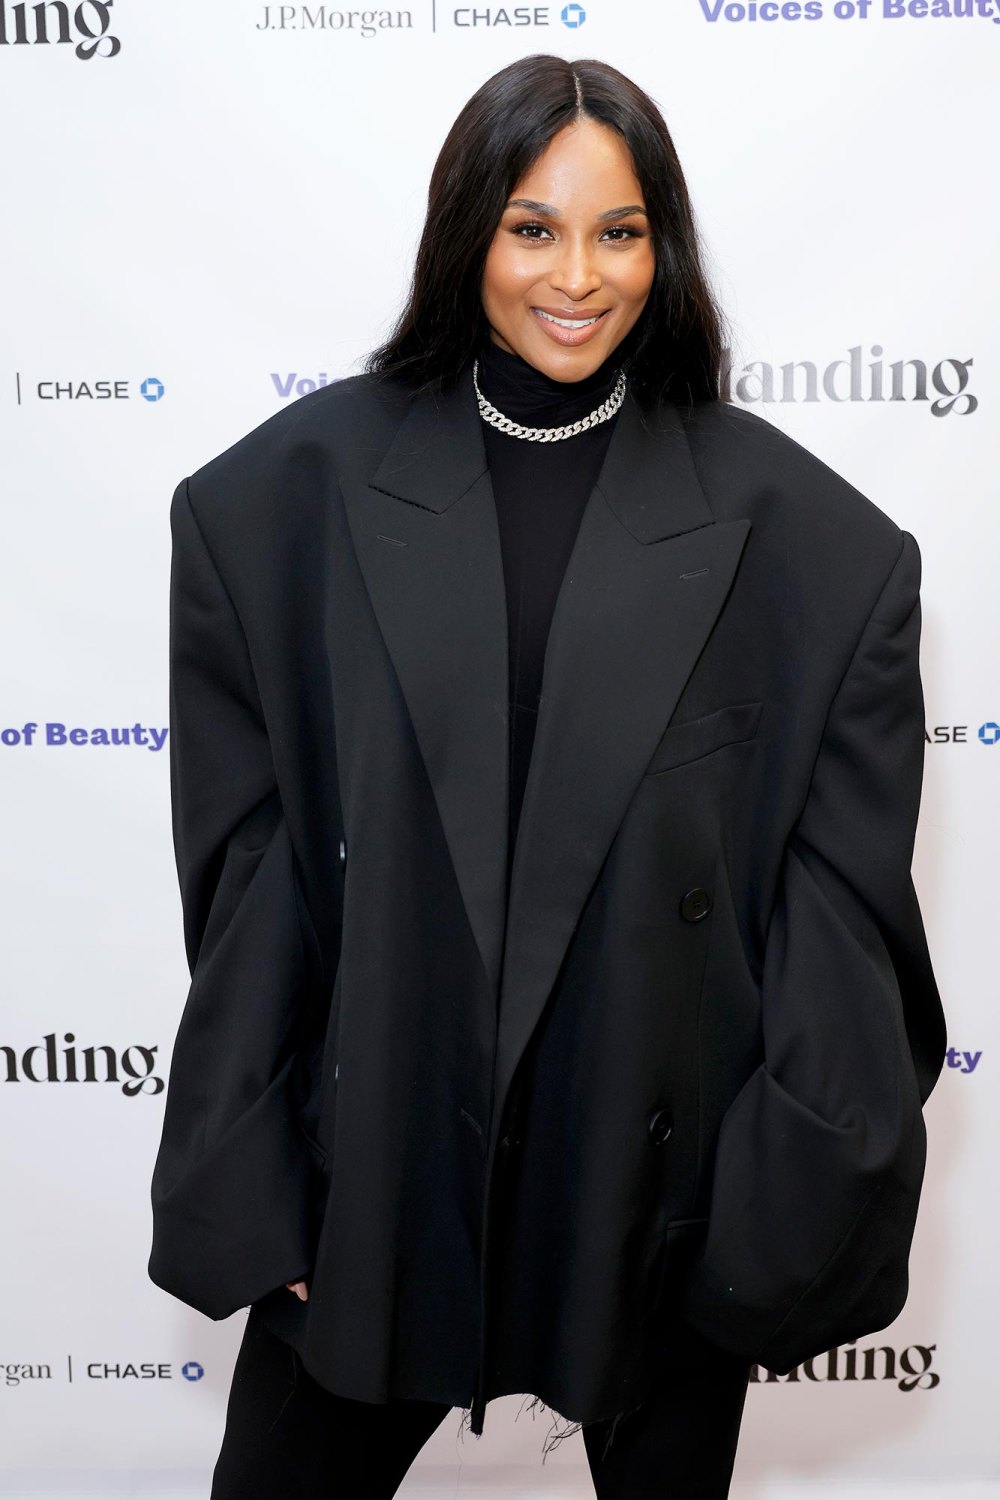 Ciara Teases Journey to Lose 70 Pounds by Sharing a Scale Pic of Her Progress